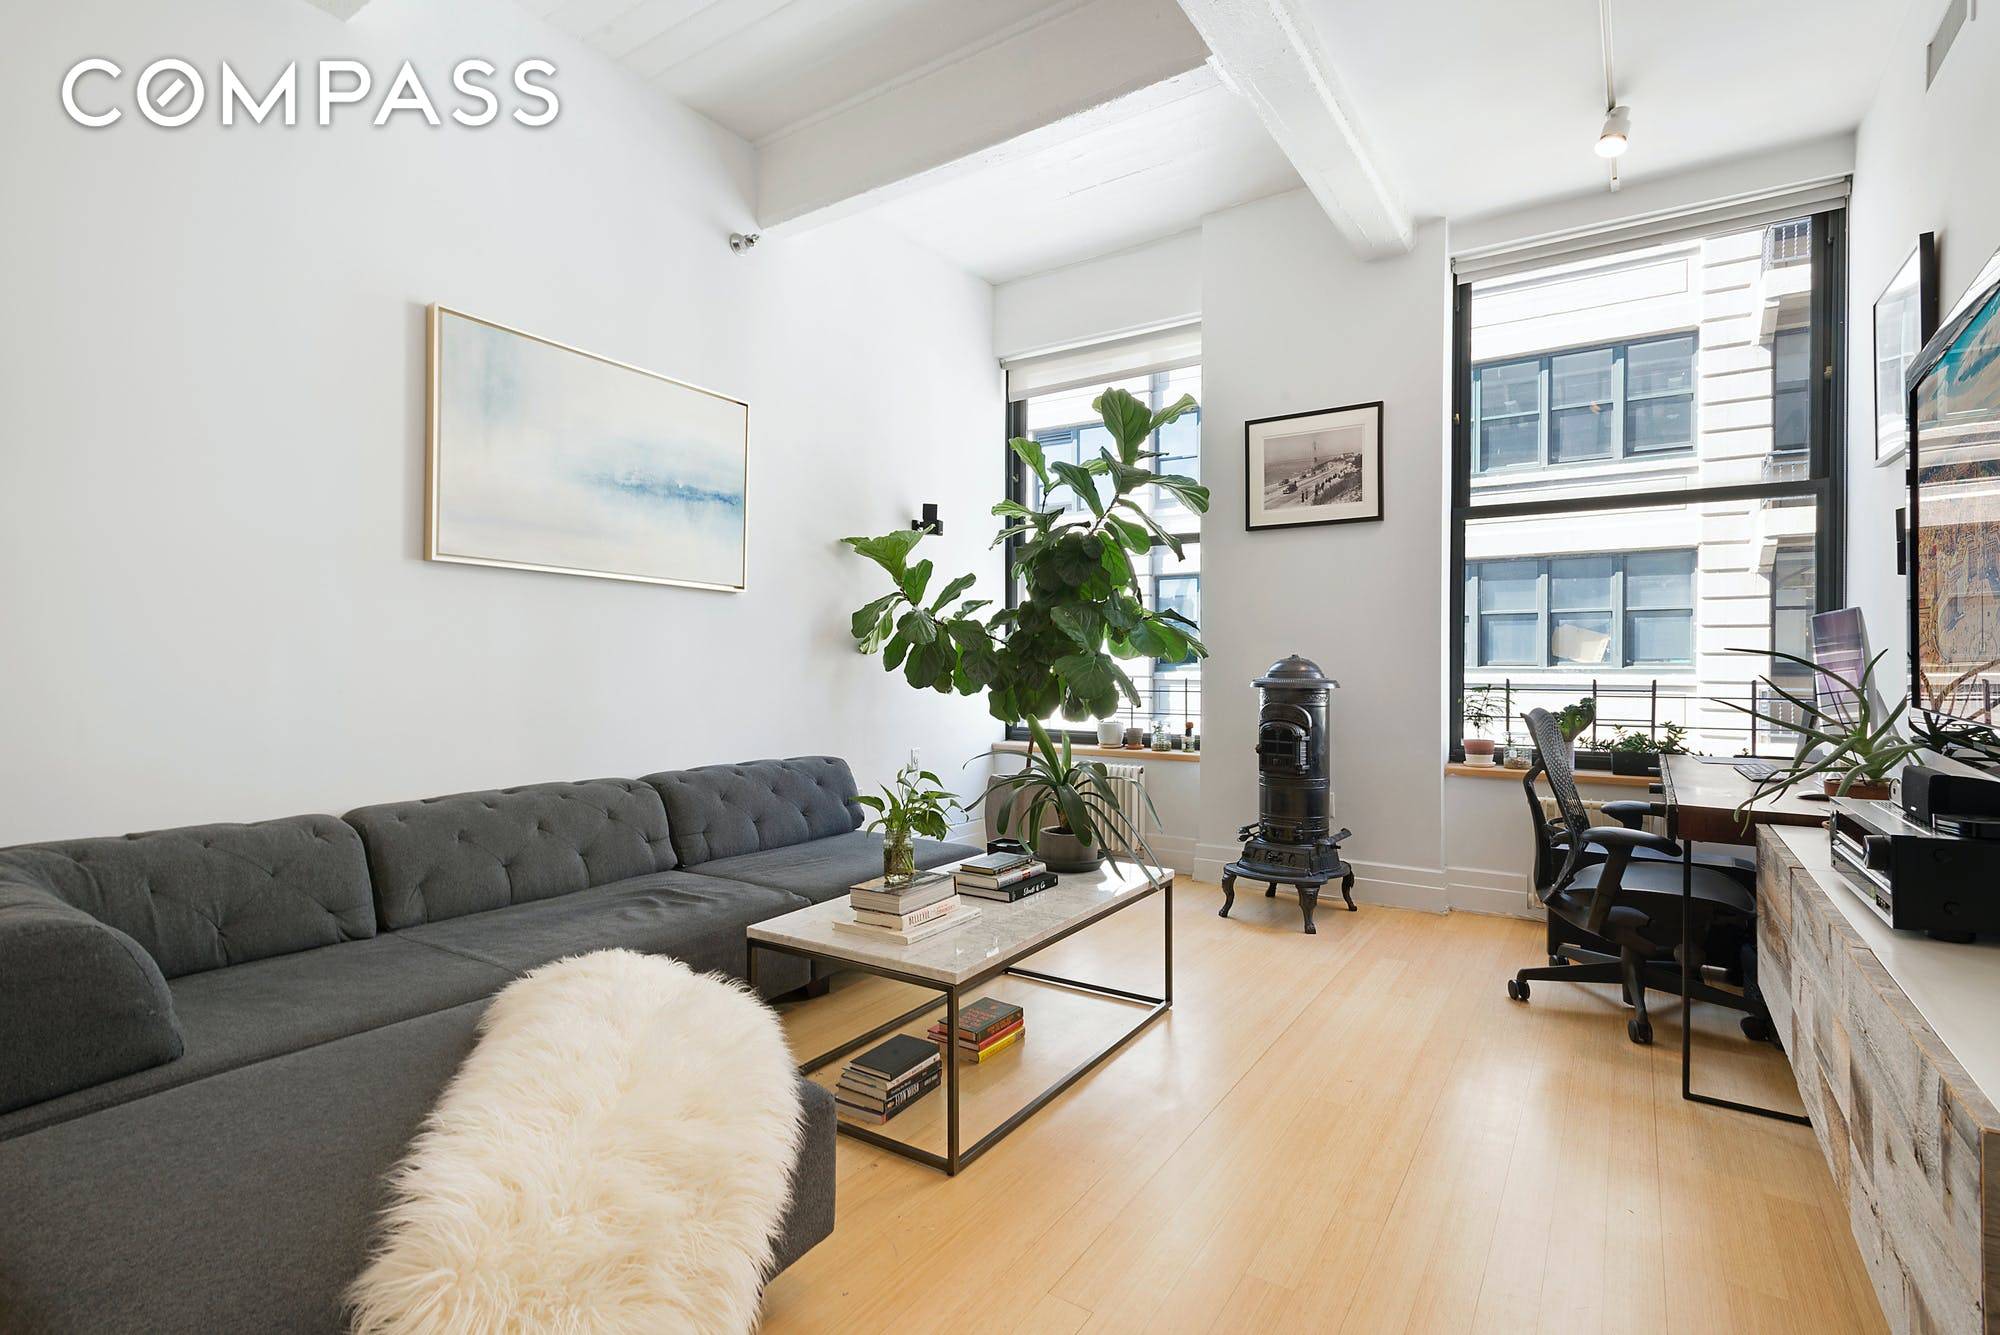 The best loft style living DUMBO has to offer.